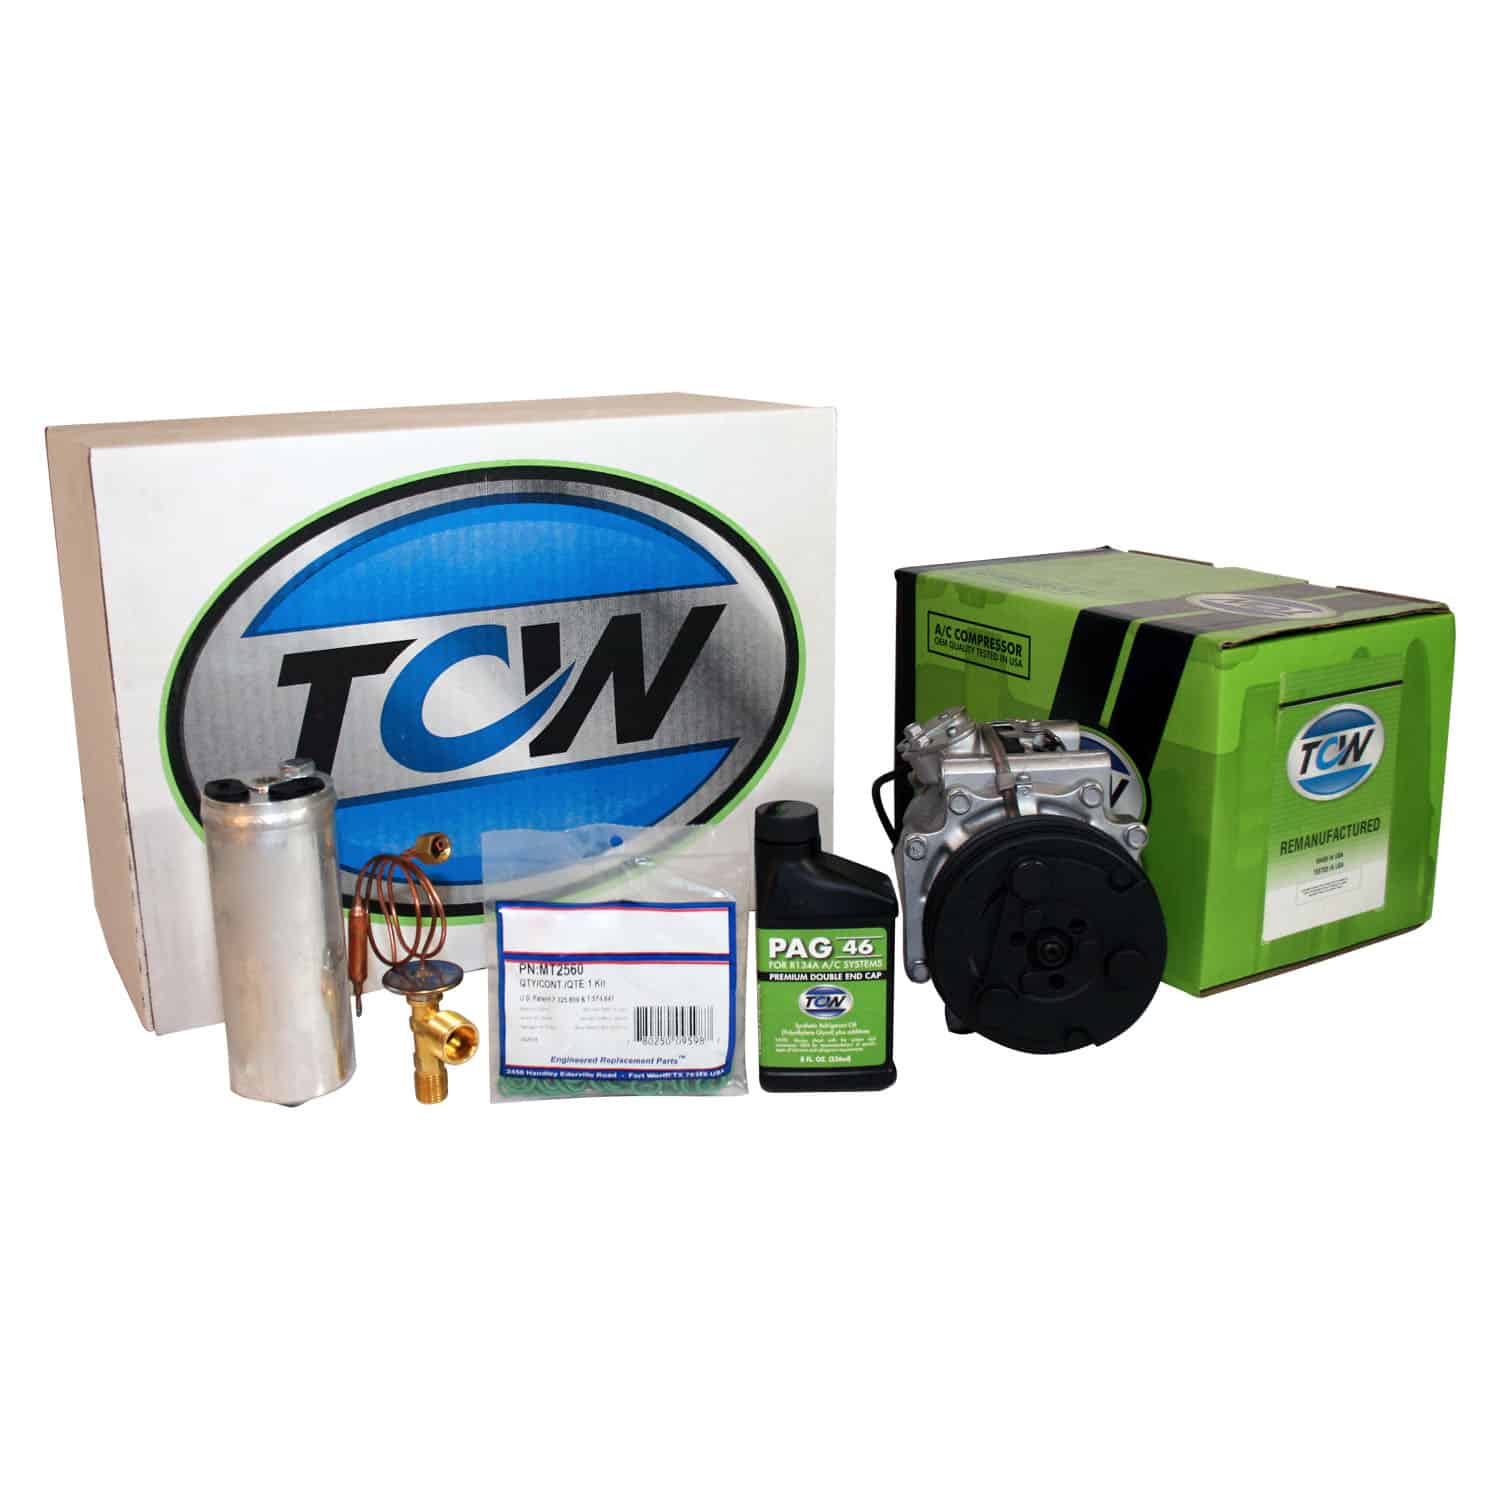 TCW Vehicle A/C Kit K1000305R Remanufactured Product Image field_60b6a13a6e67c